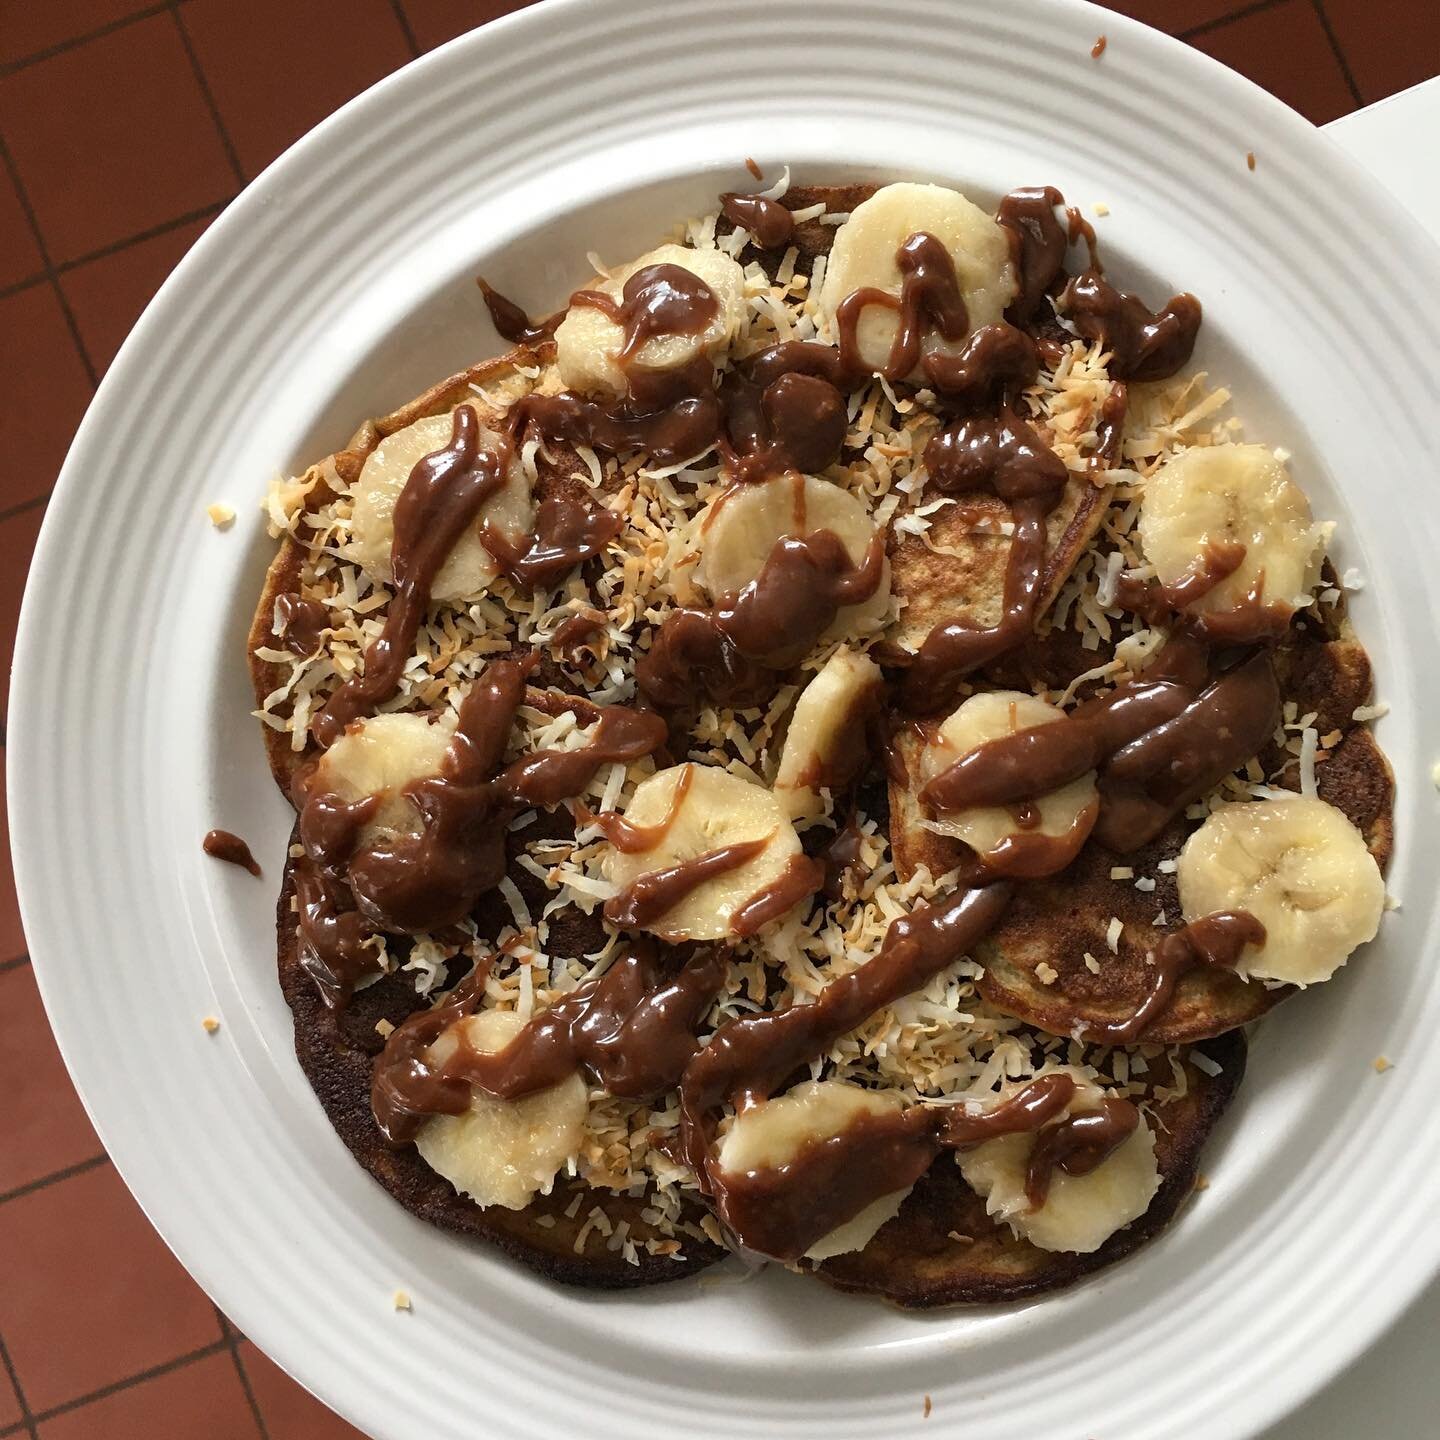 ooo baby u know i had to really send it for my final palmy sunday pancakes&hellip; absolutely abolished any health benefits of making them out of banners &amp; made a chocolate peanut butter sauce for the drizzle&hellip; also never again will i negle